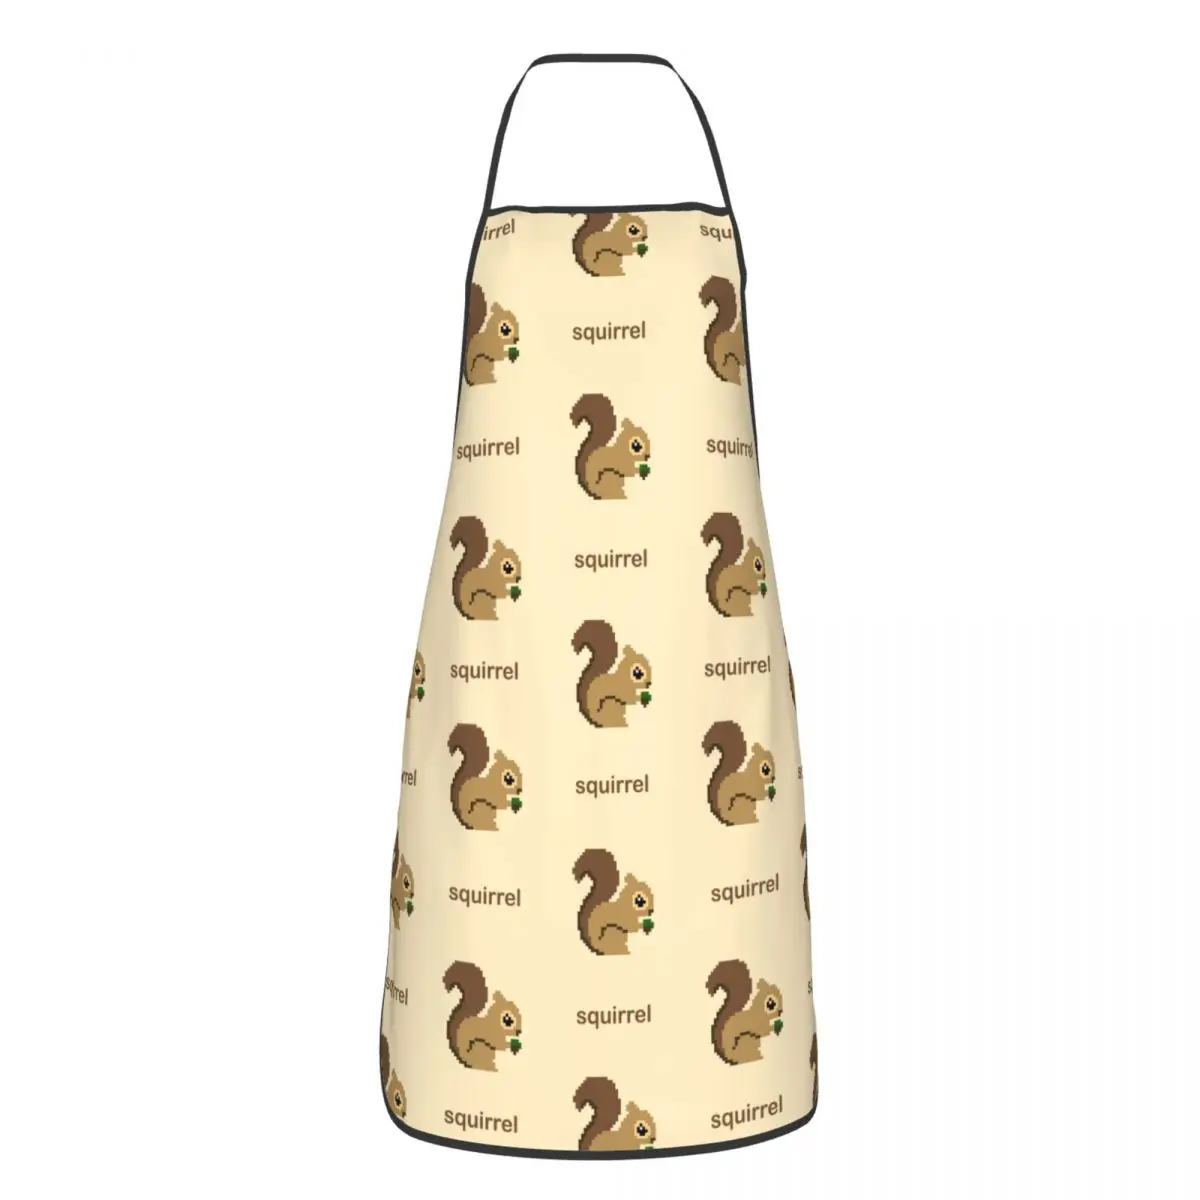 

Funny Squirrel Kitchen Grill Aprons Adjustable Cartoon Cute Animal Pinafores for Chef Barista Restaurant